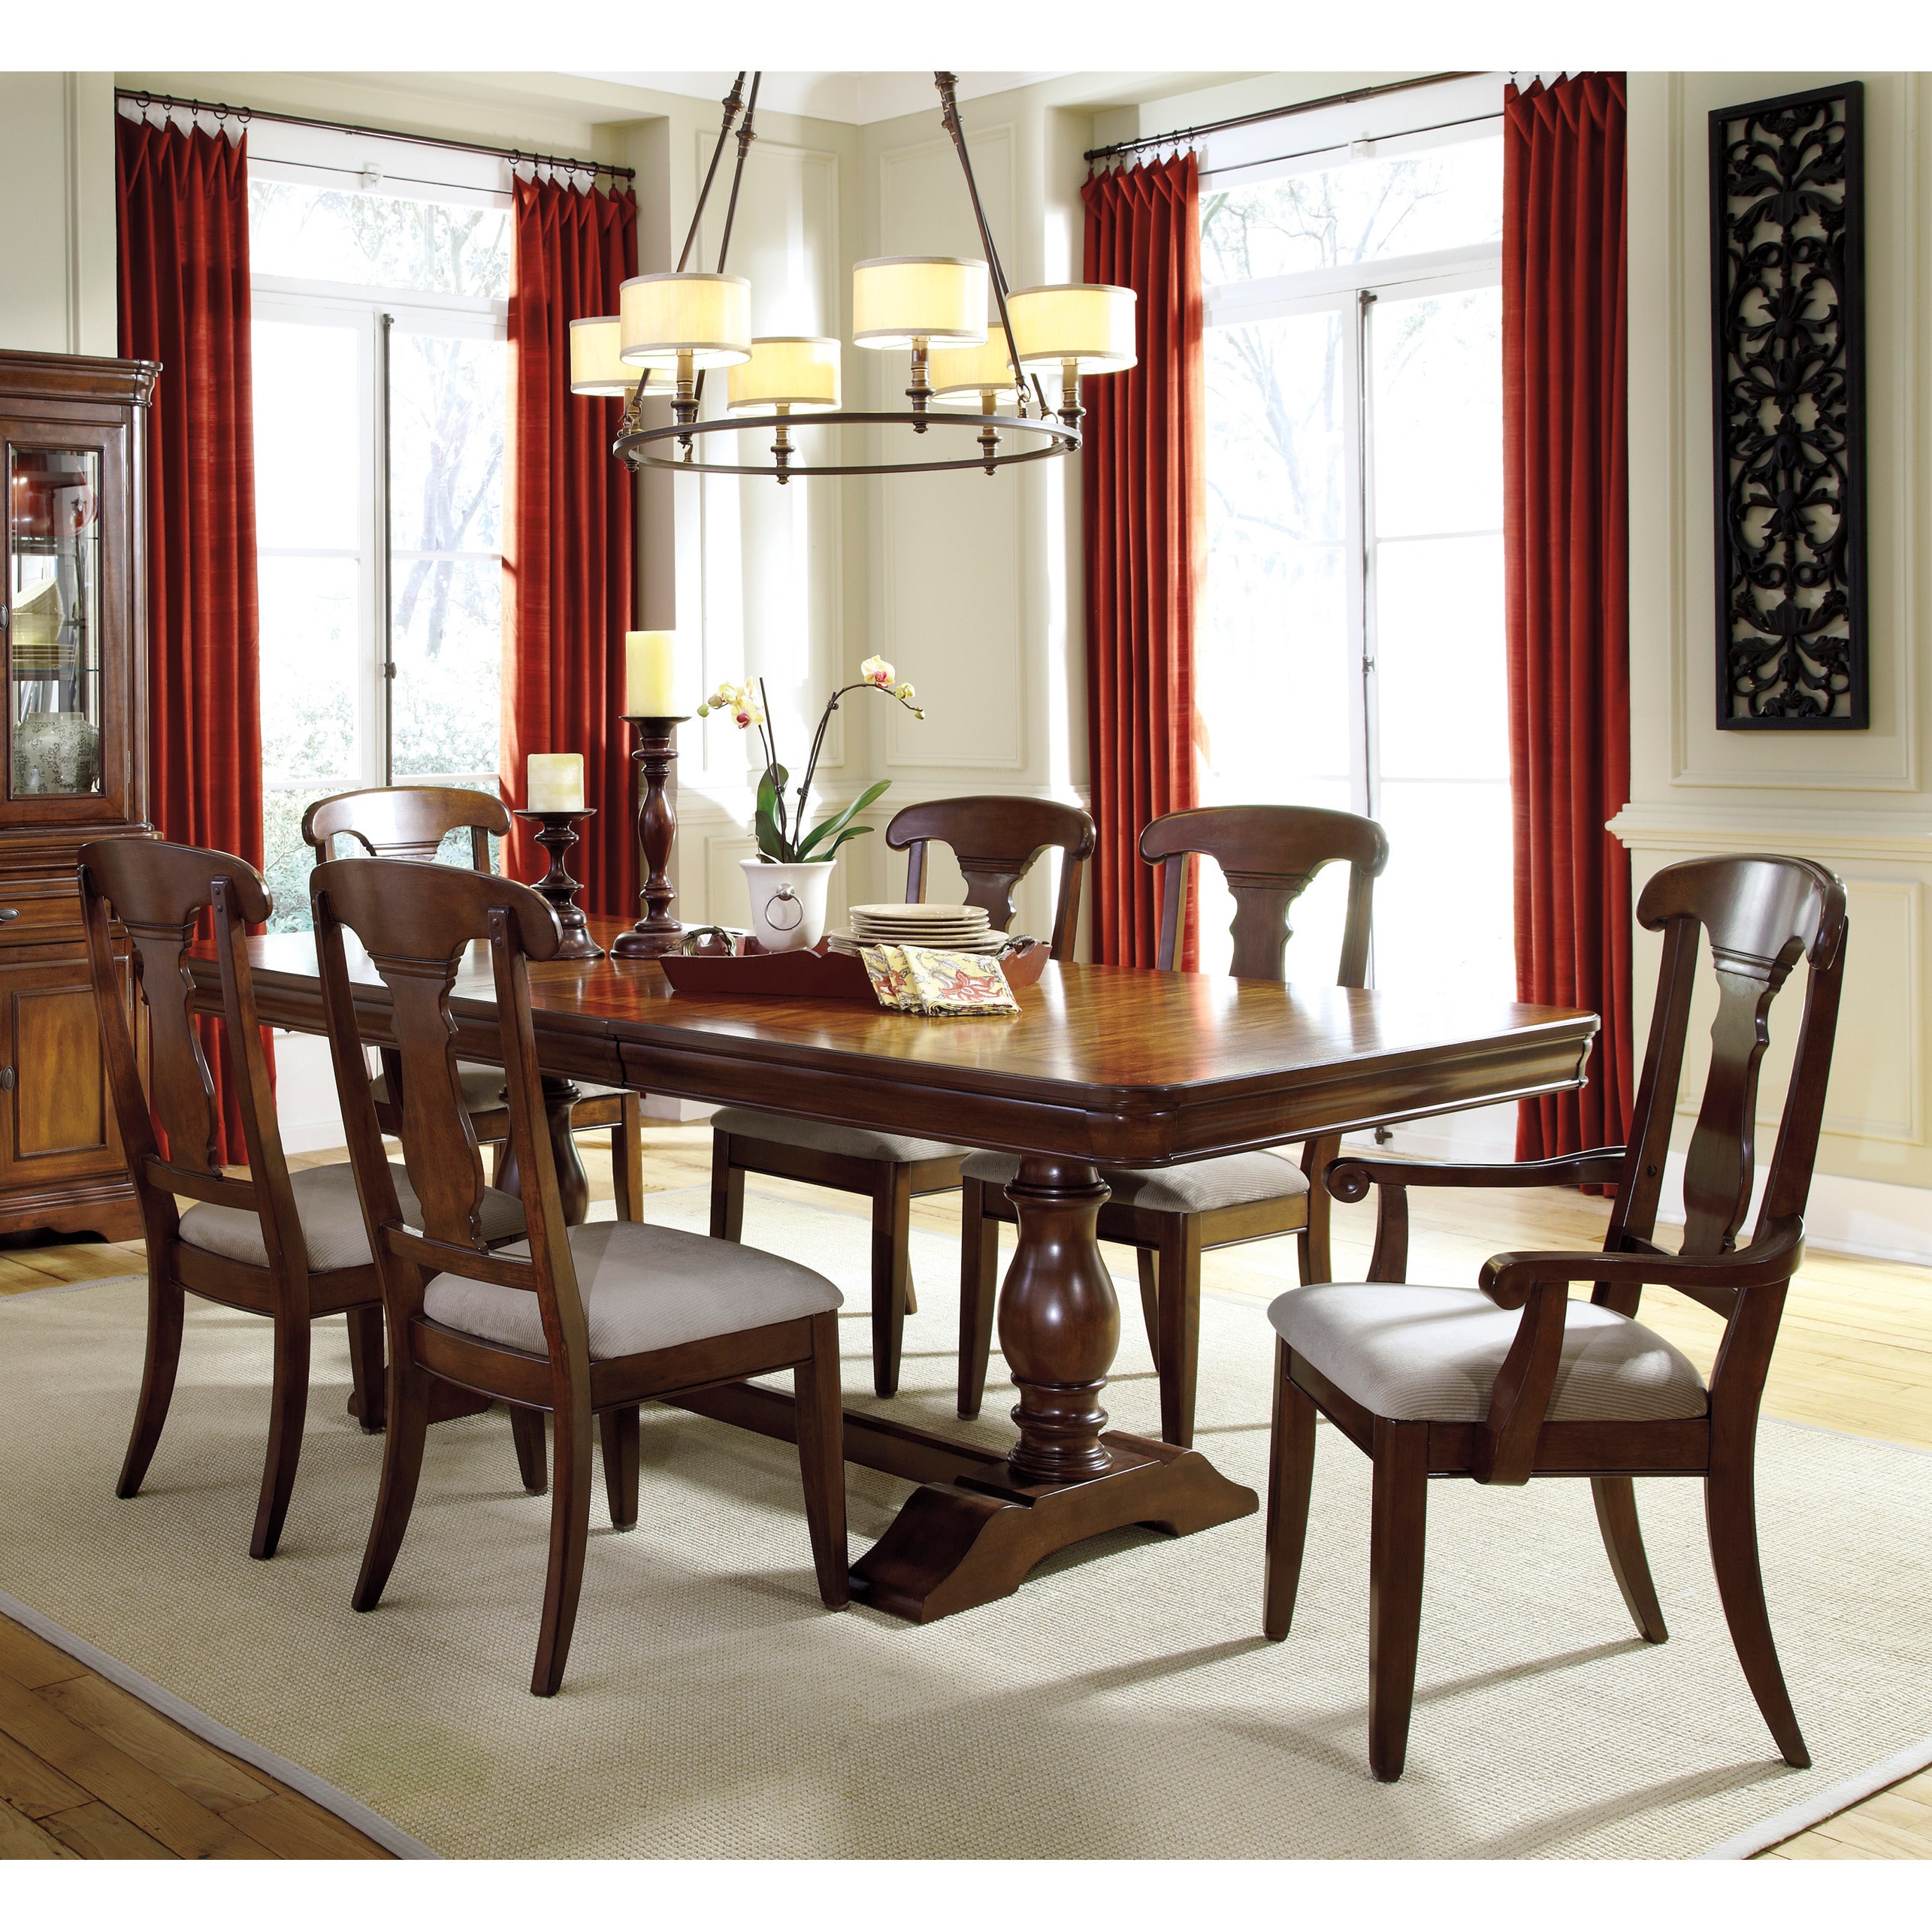 Dining Benchcraft Manufactured By Ashley Furniture Industries Leximore Dark Brown 5 Piece Dining Set Overstock 9620559